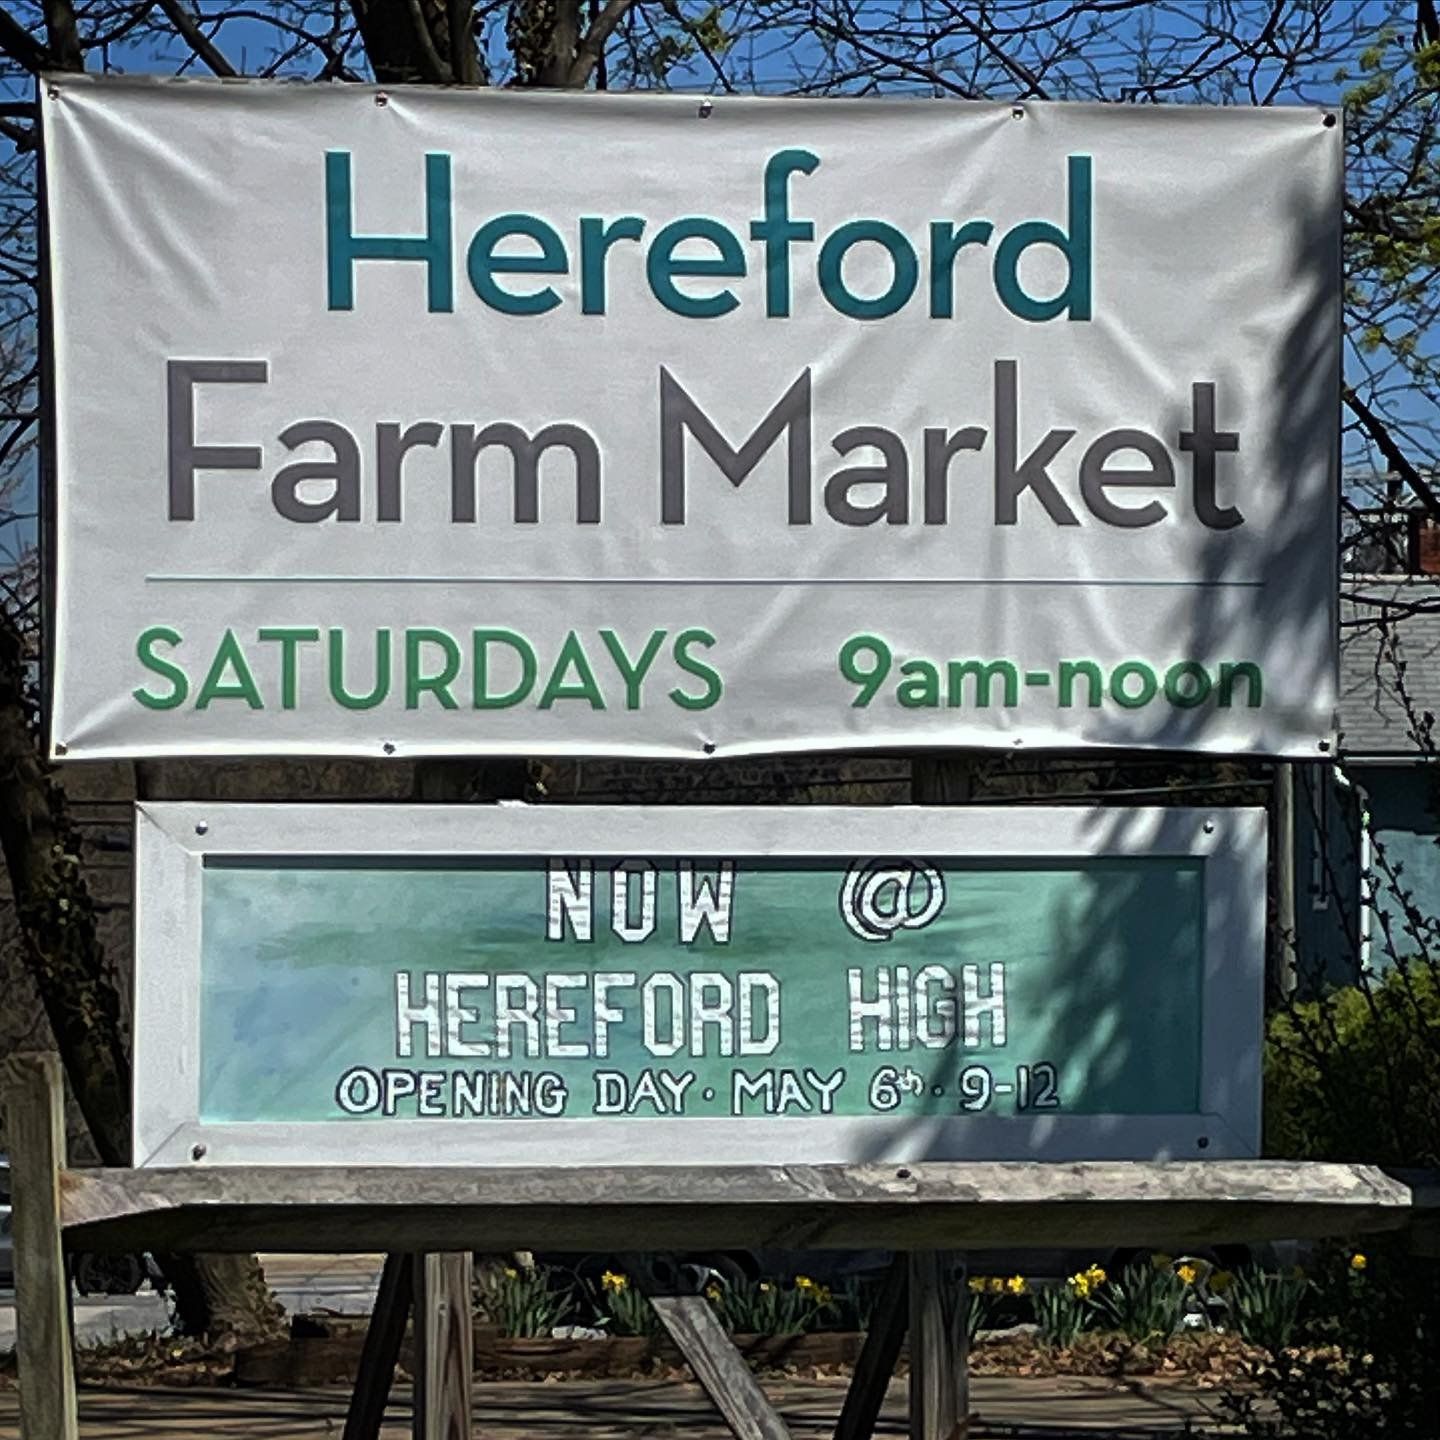 First Hereford Farmers Market and Spring Share #5!